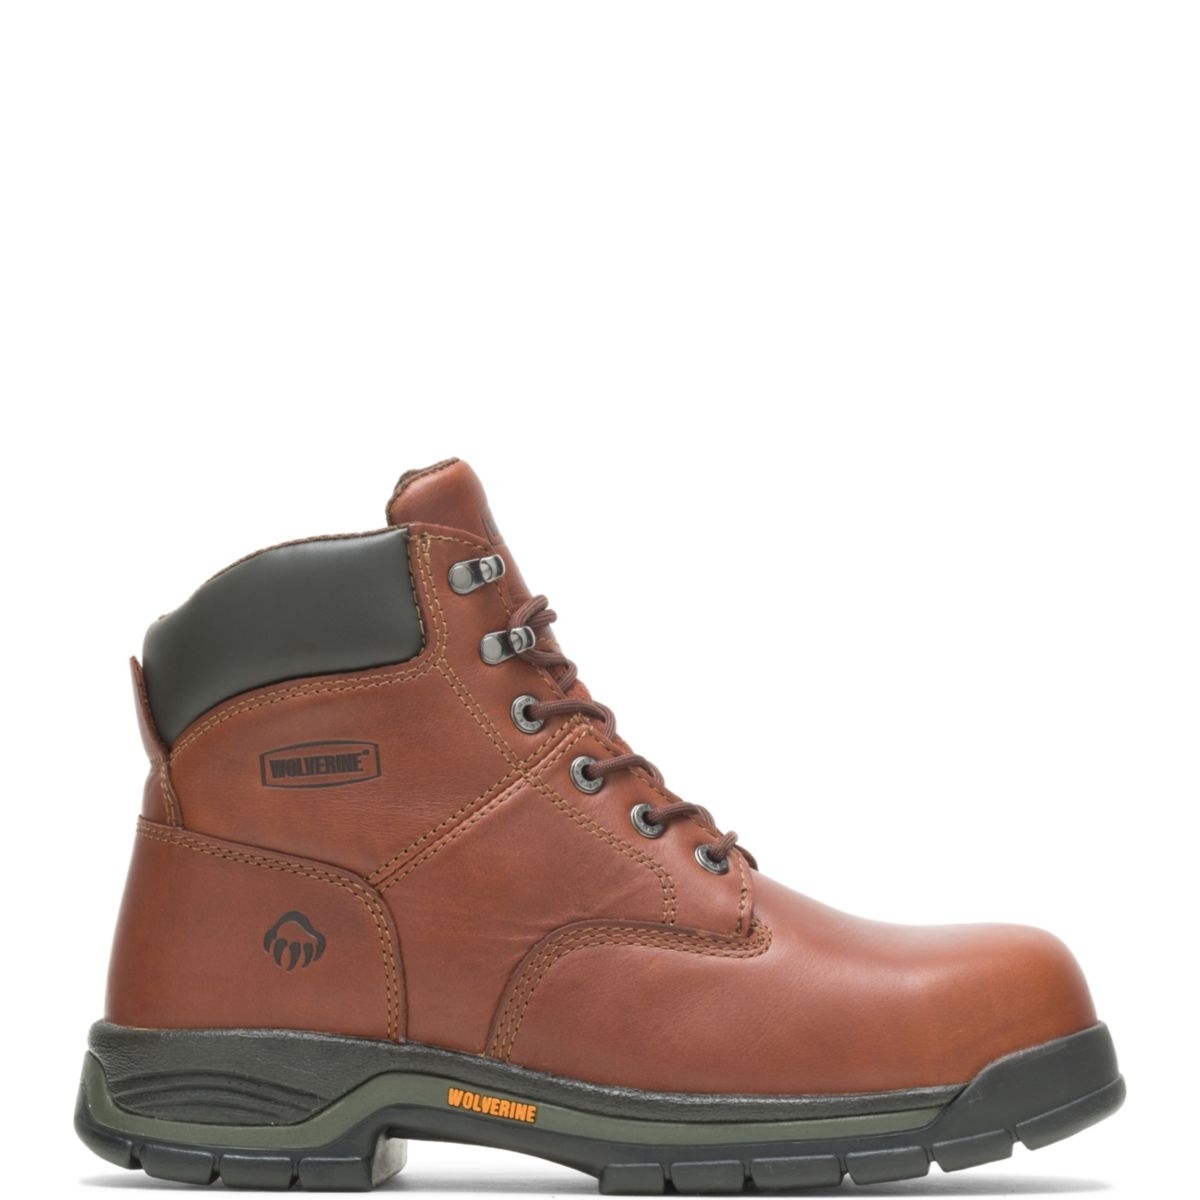 WOLVERINE Men's Harrison 6 Lace-Up SoftToe Work Boot Brown - W04906 Varies BROWN - BROWN, 7 X-Wide